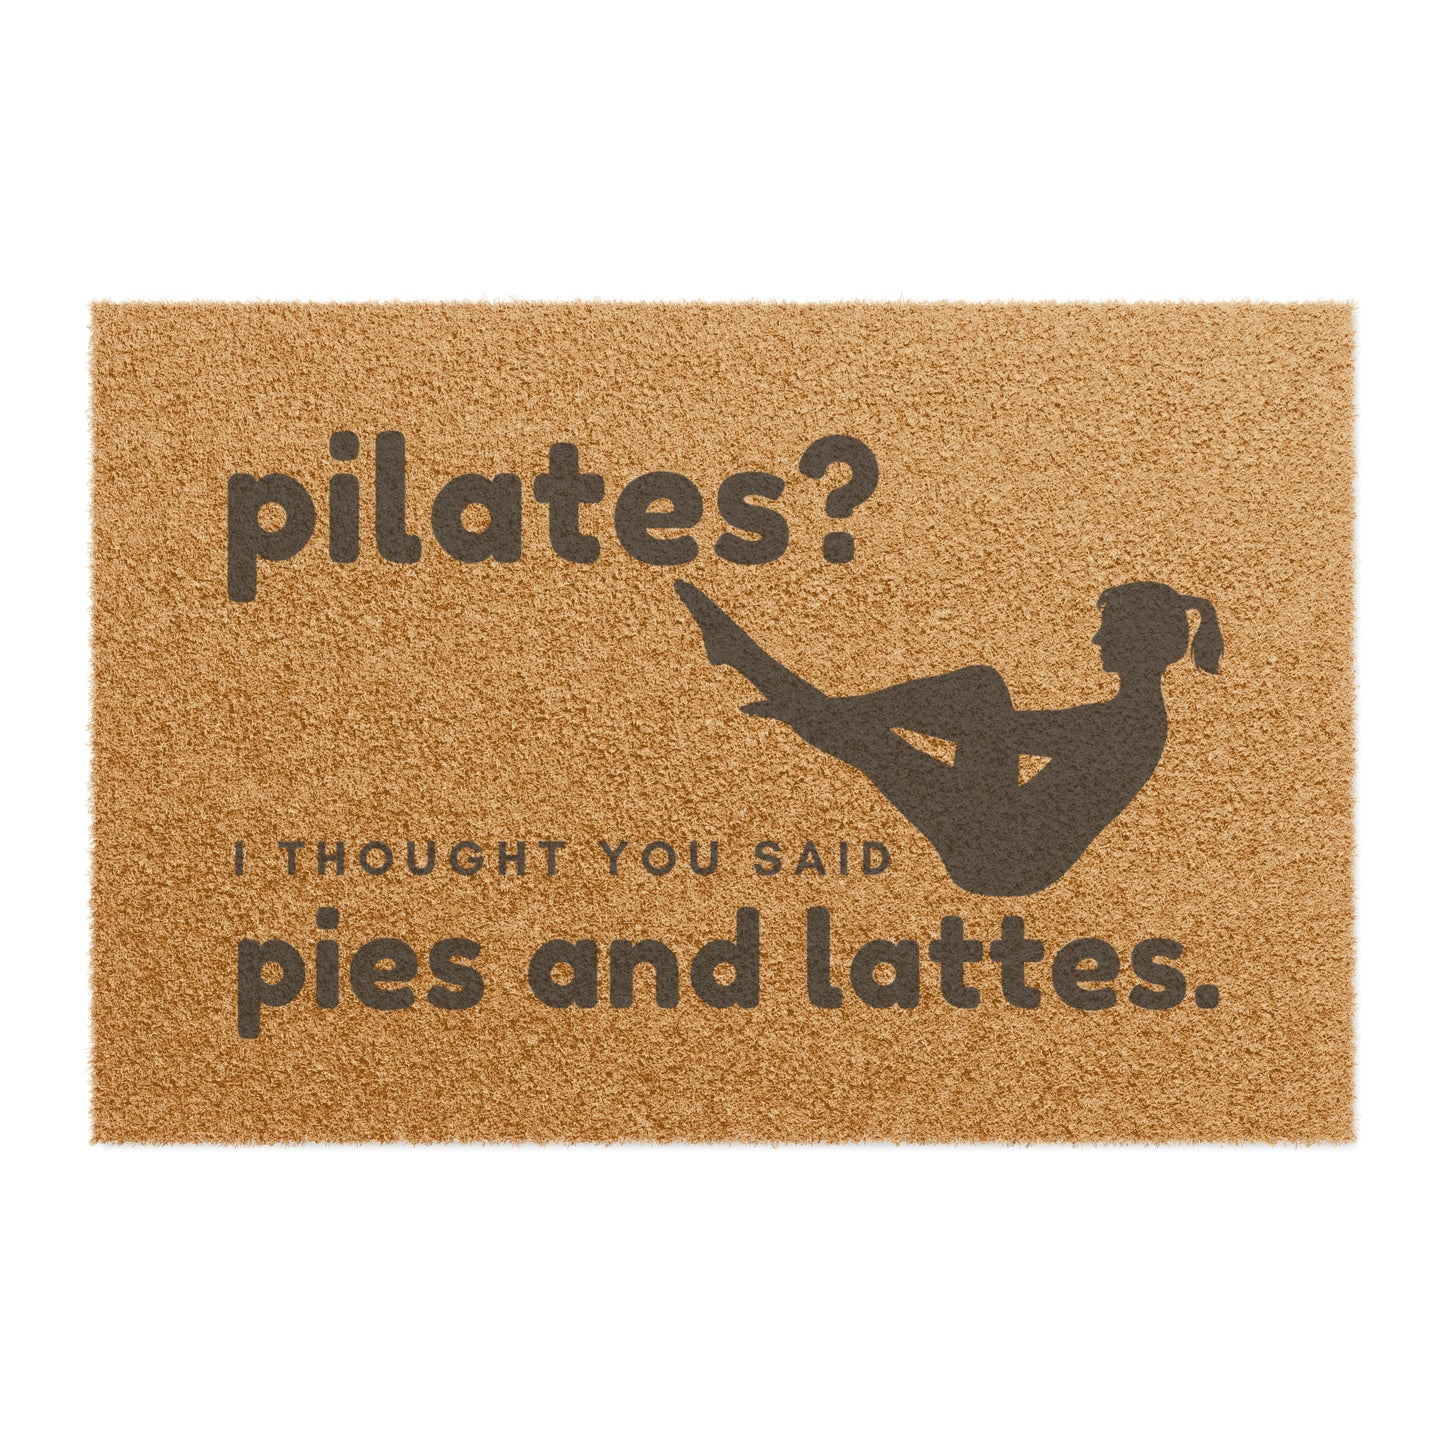 Pilates? I though you said Pies and Lattes - Pilates Doormat